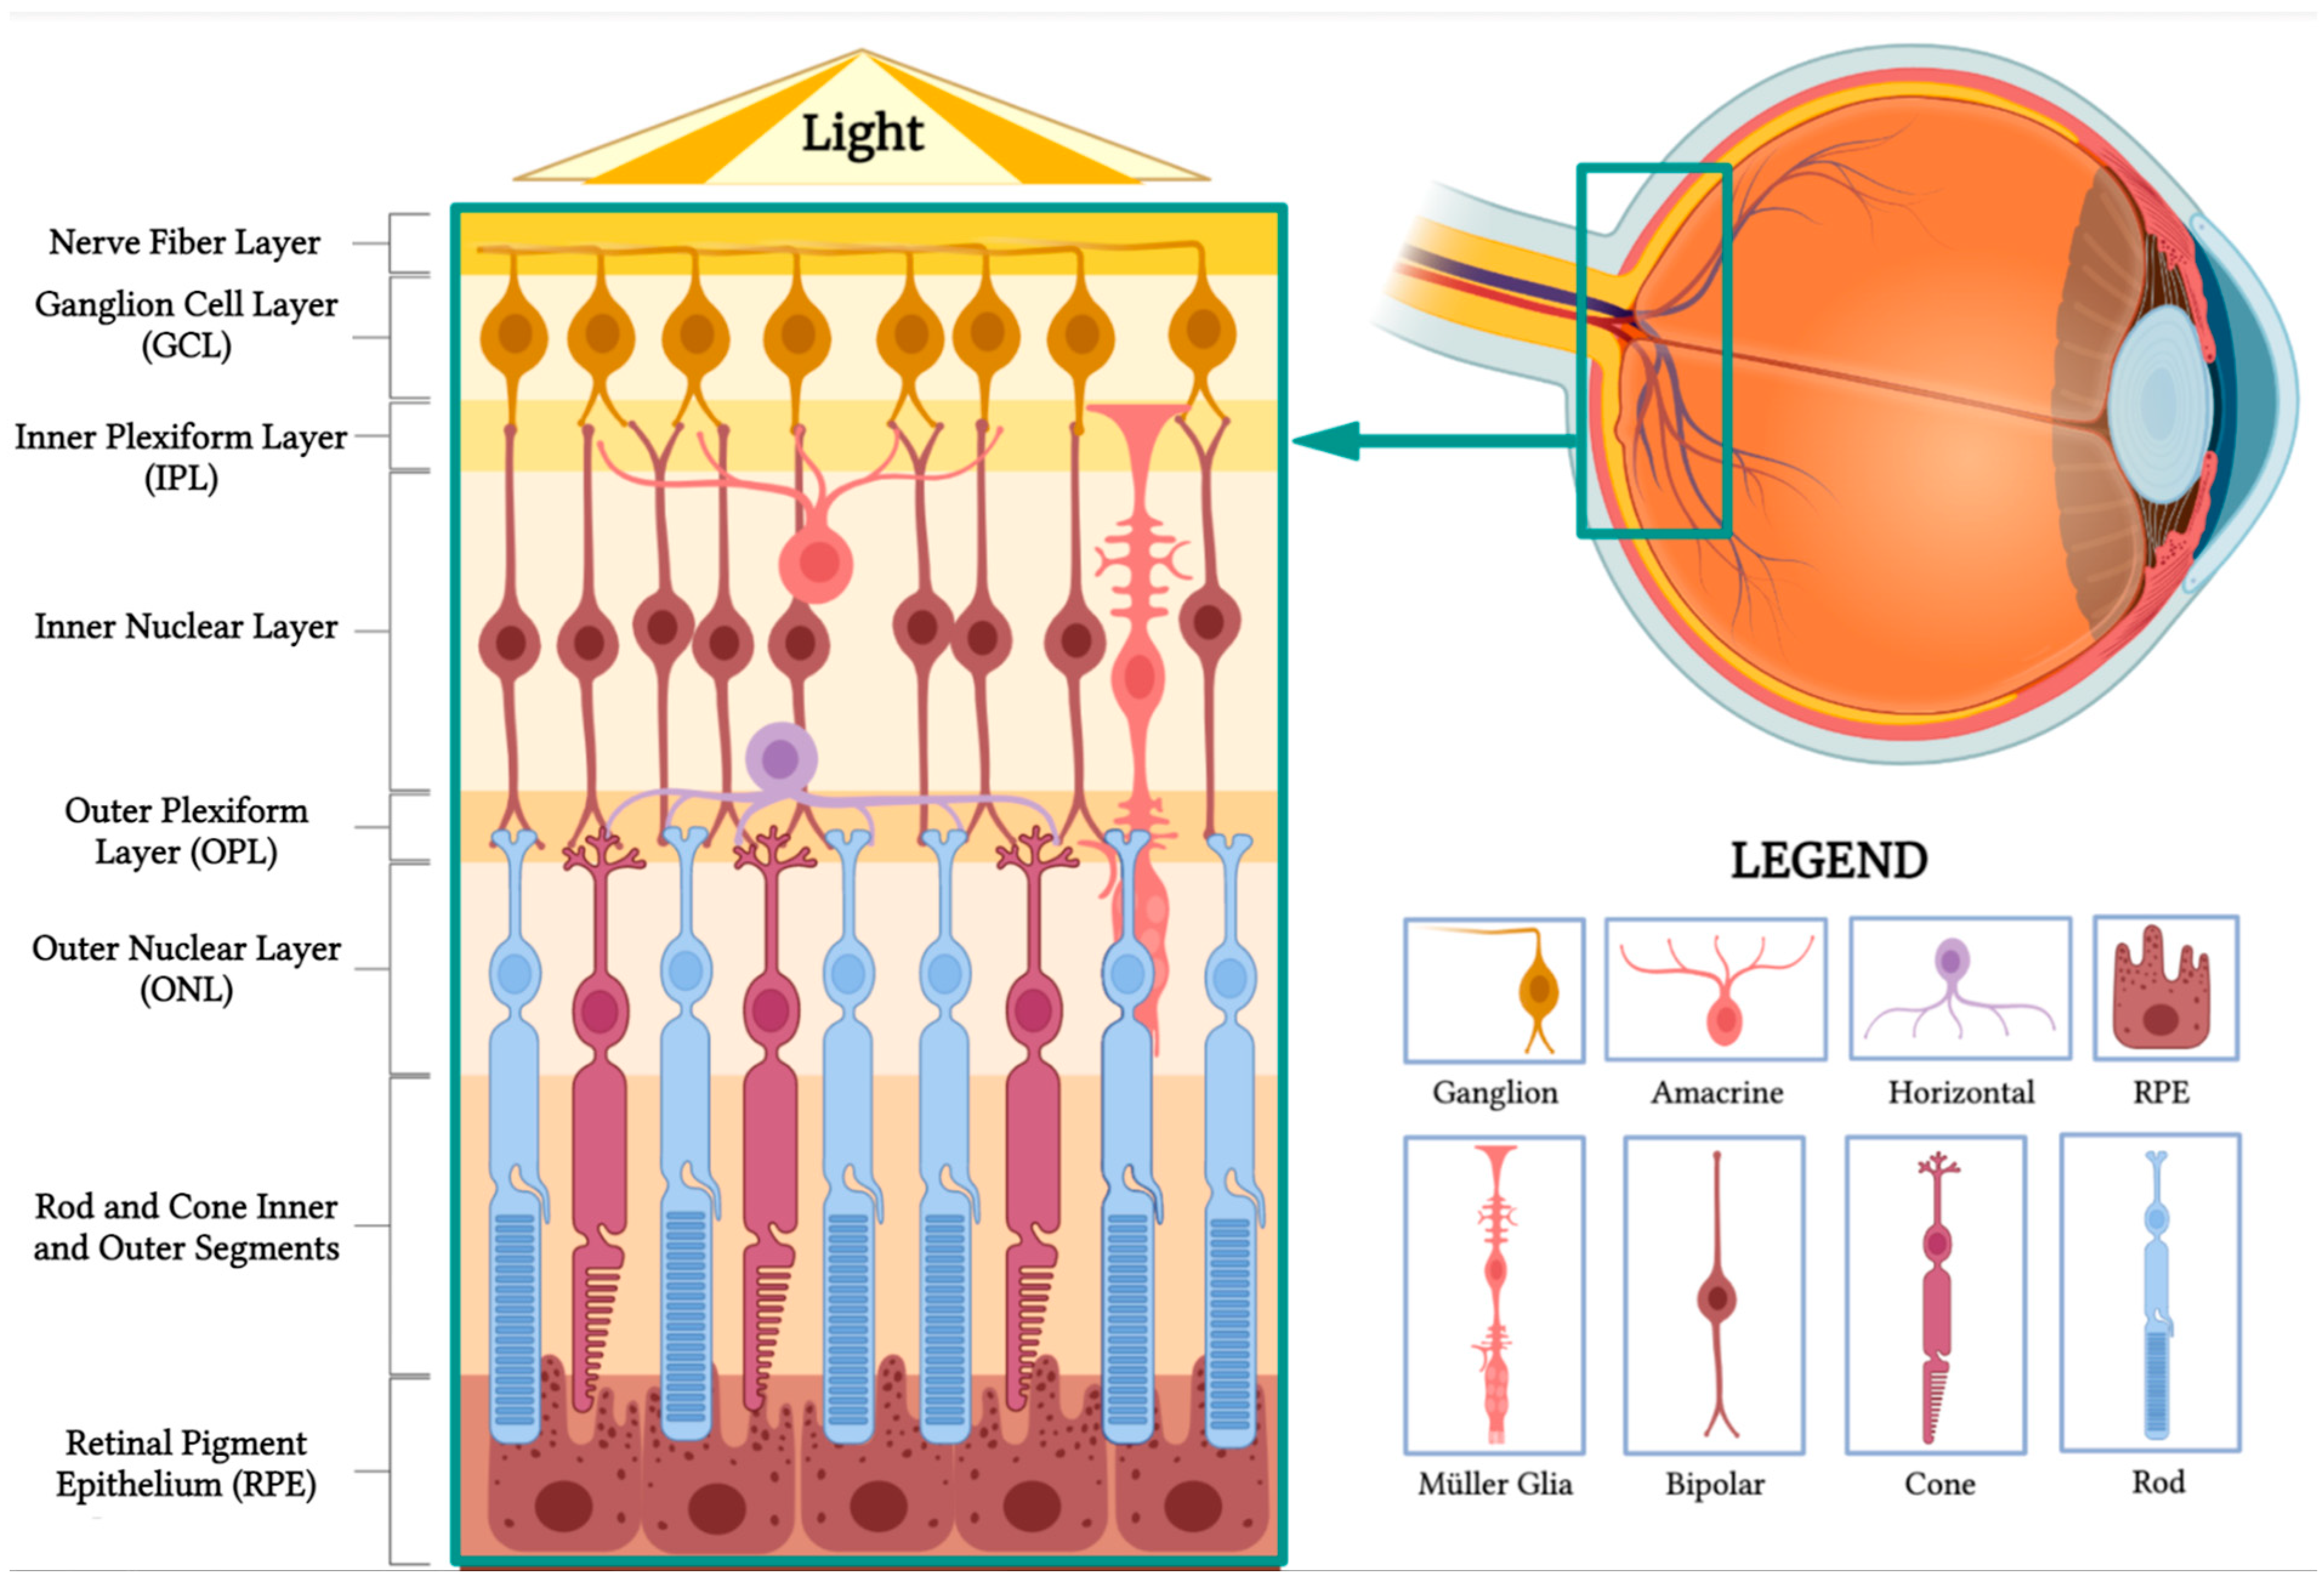 Layers of the Retina - Discovery Eye Foundation